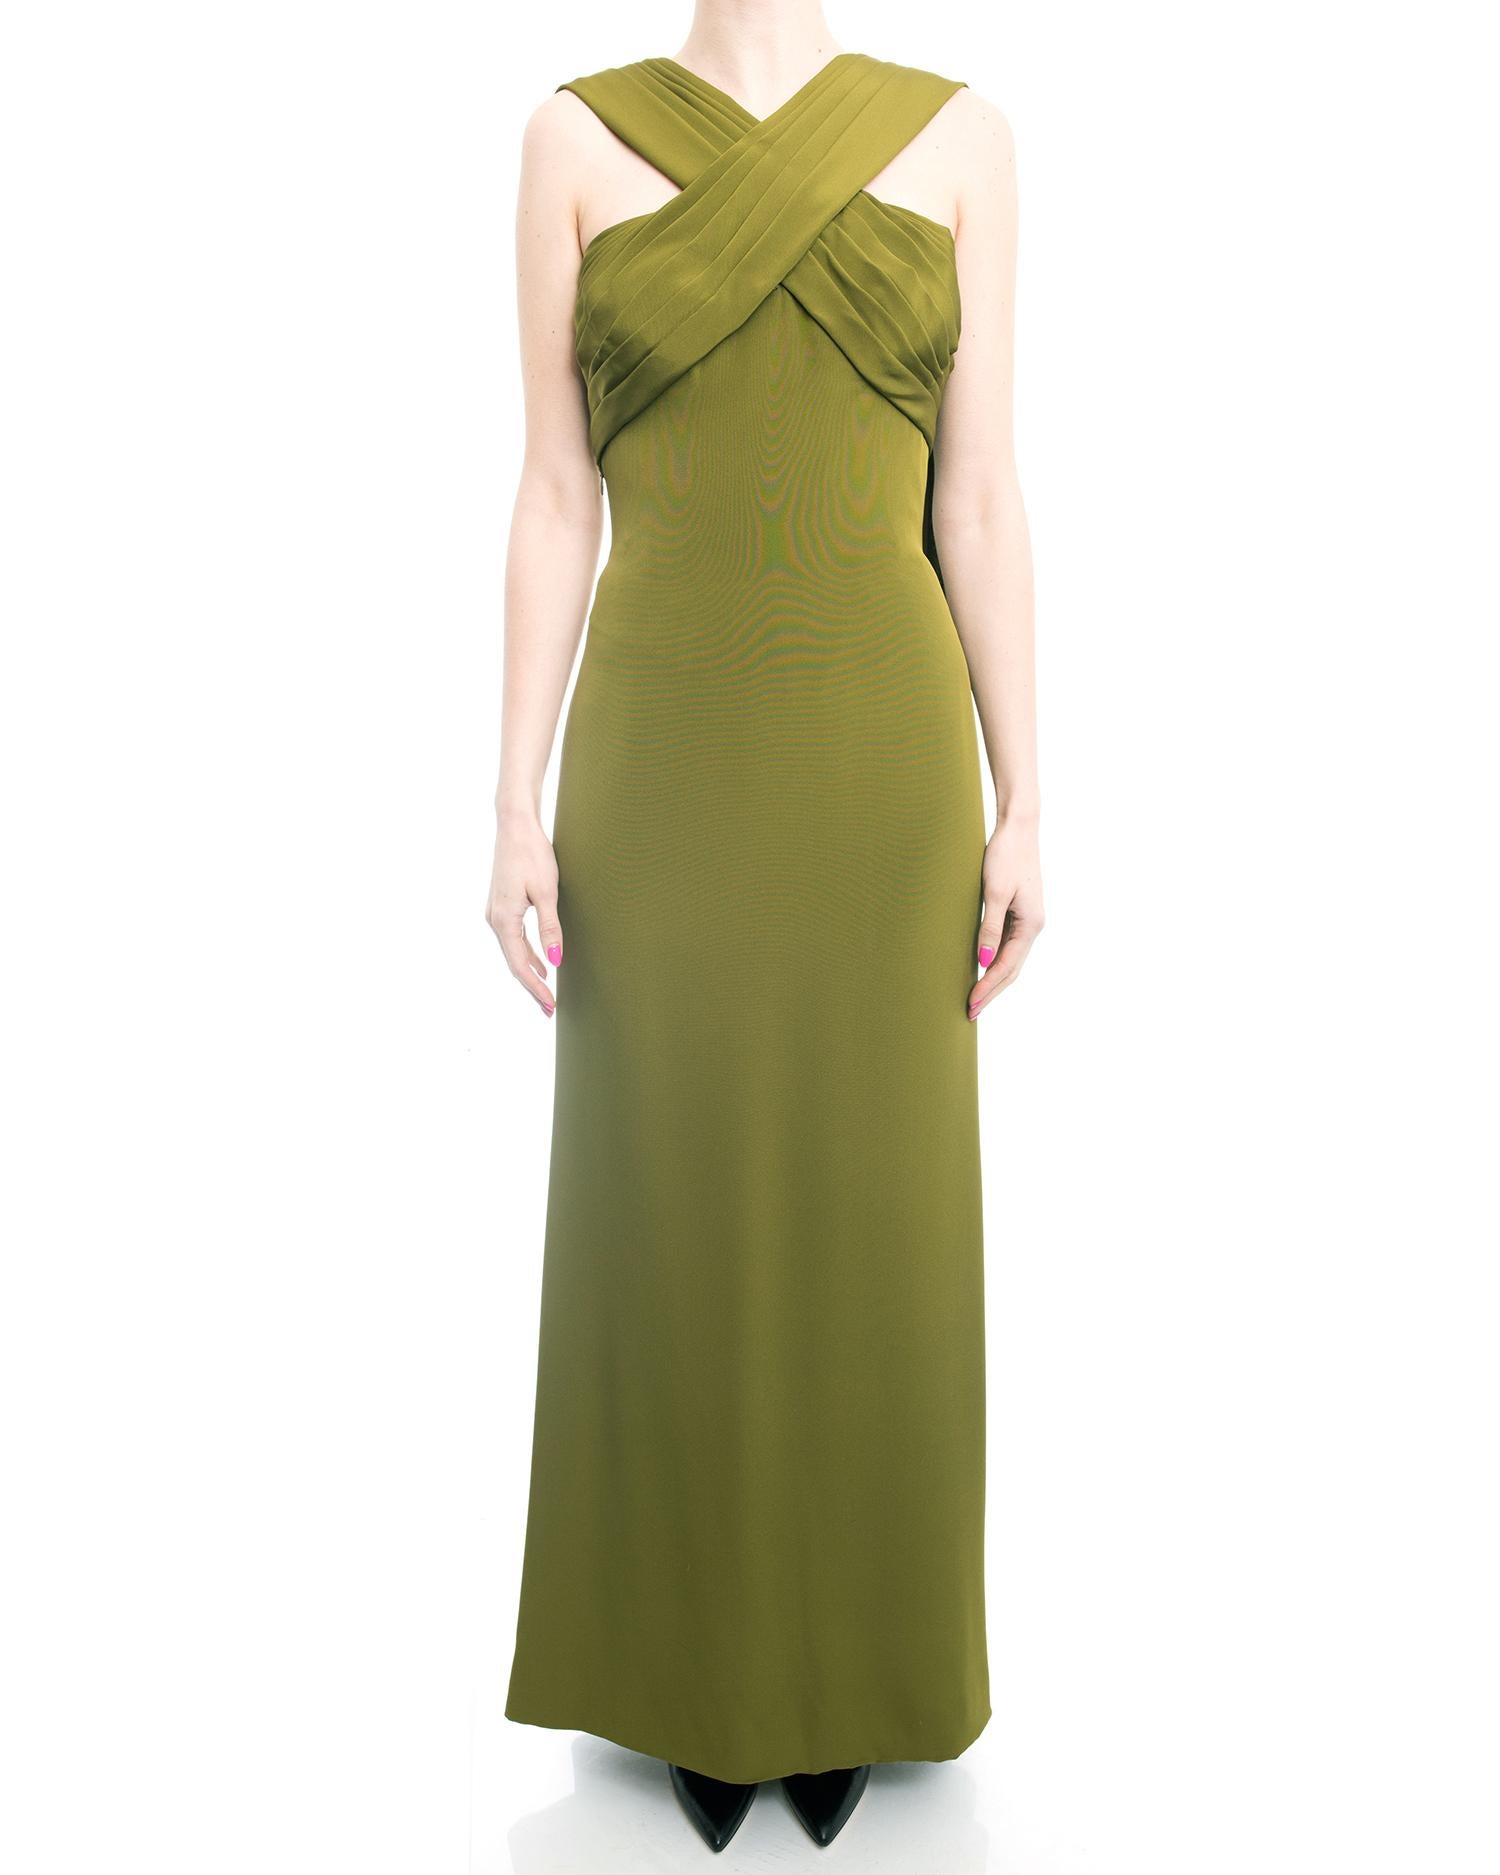 Women's Yves Saint Laurent Haute Couture Vintage 1990’s Olive Green Gown For Sale